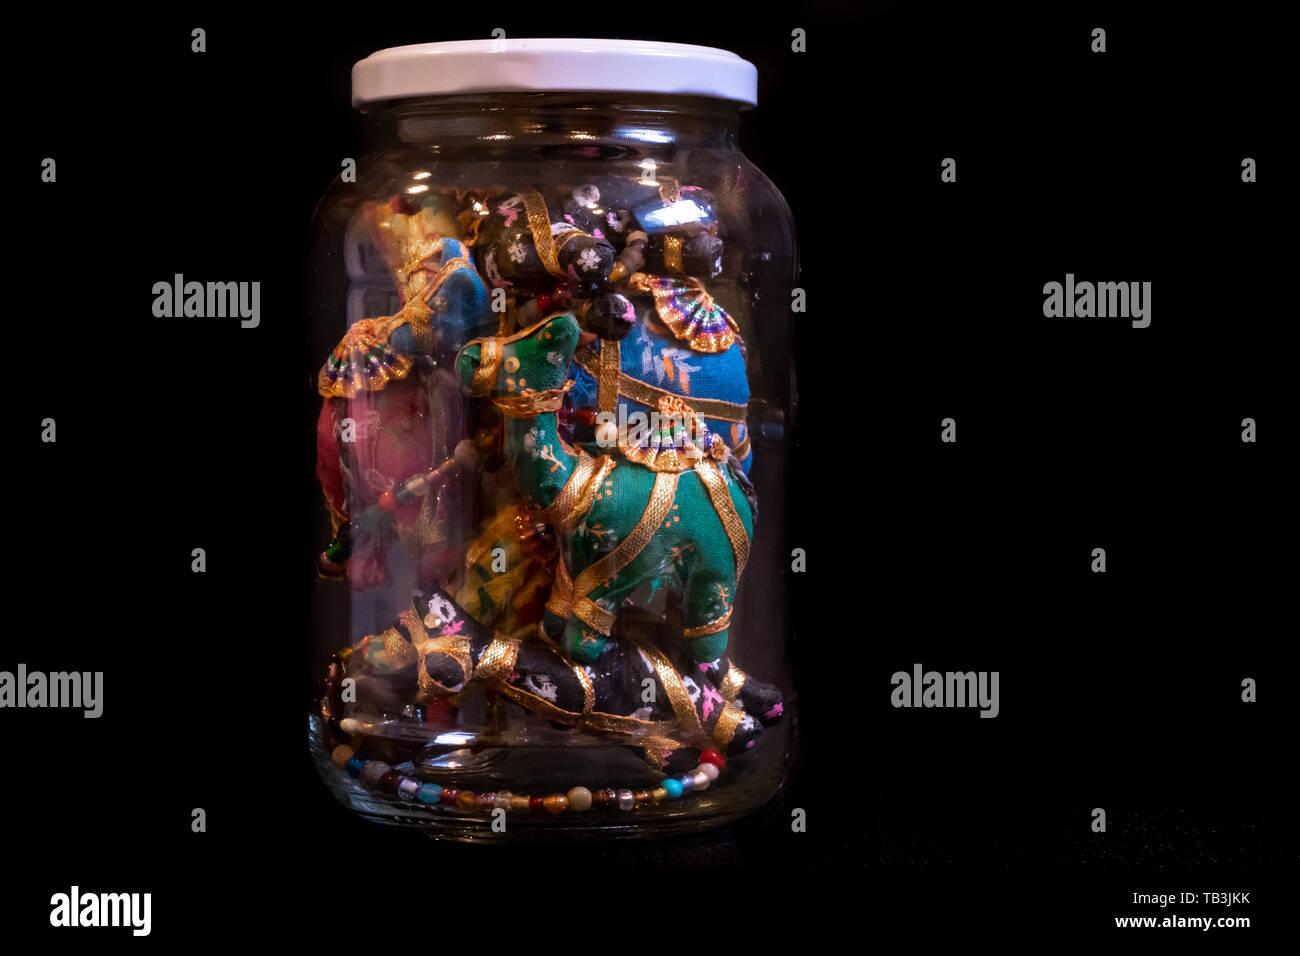 Colorful Israeli, middle-eastern souvenir, an artisan camel garland, stowed away in a jar for a showpiece at home. Isolated on a dark background. Stock Photo